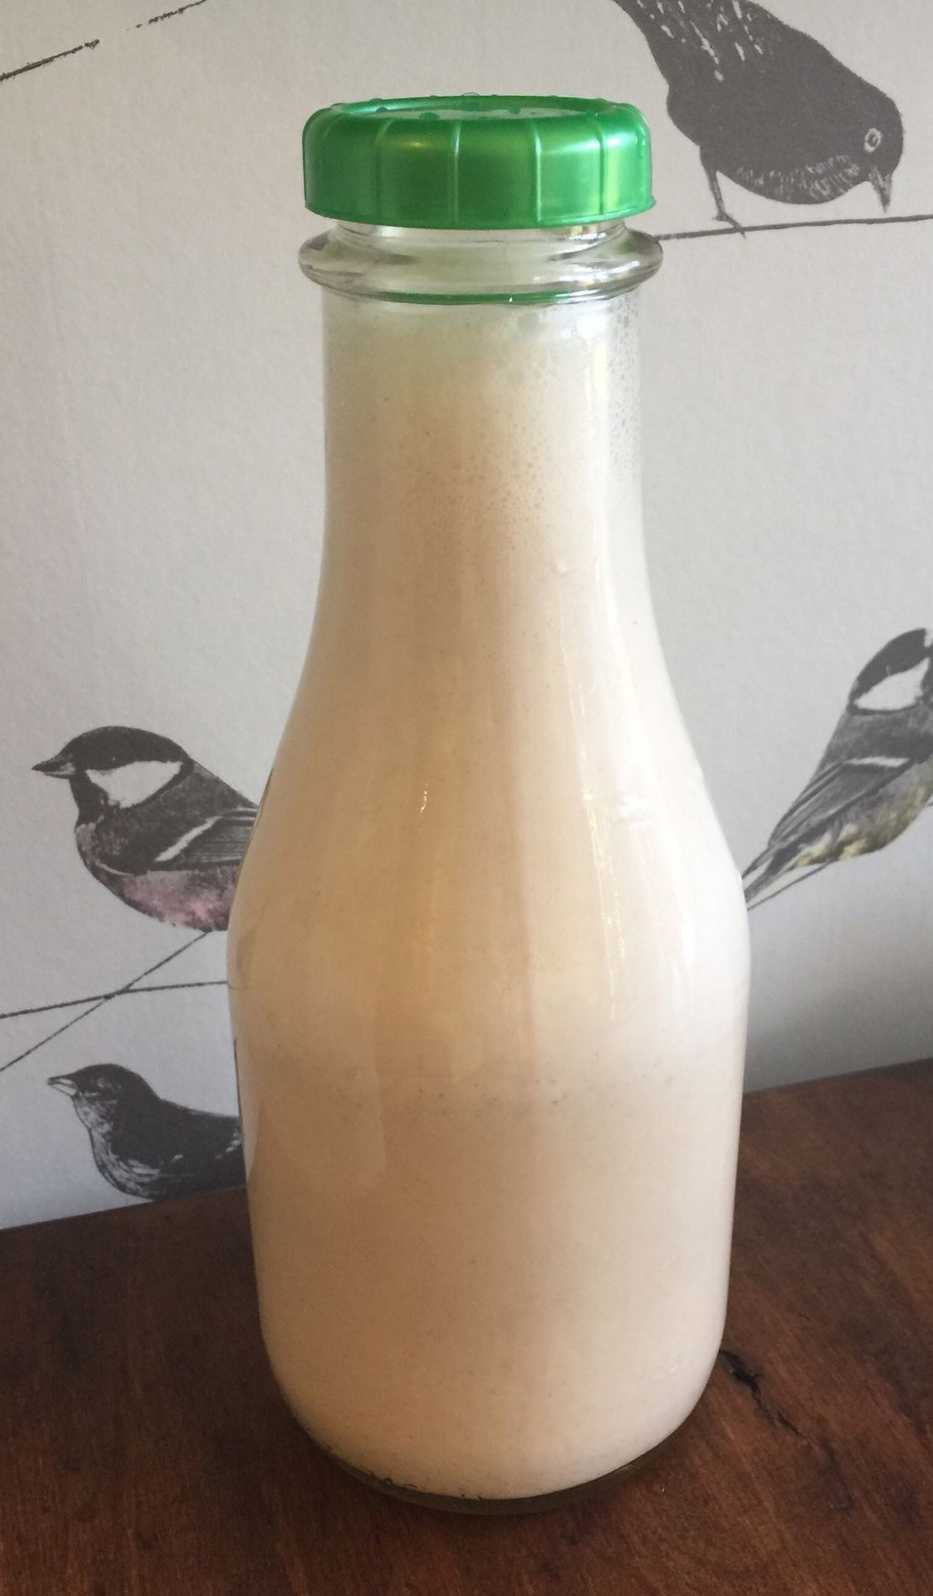 Homemade Almond Milk with New Healthier Options2